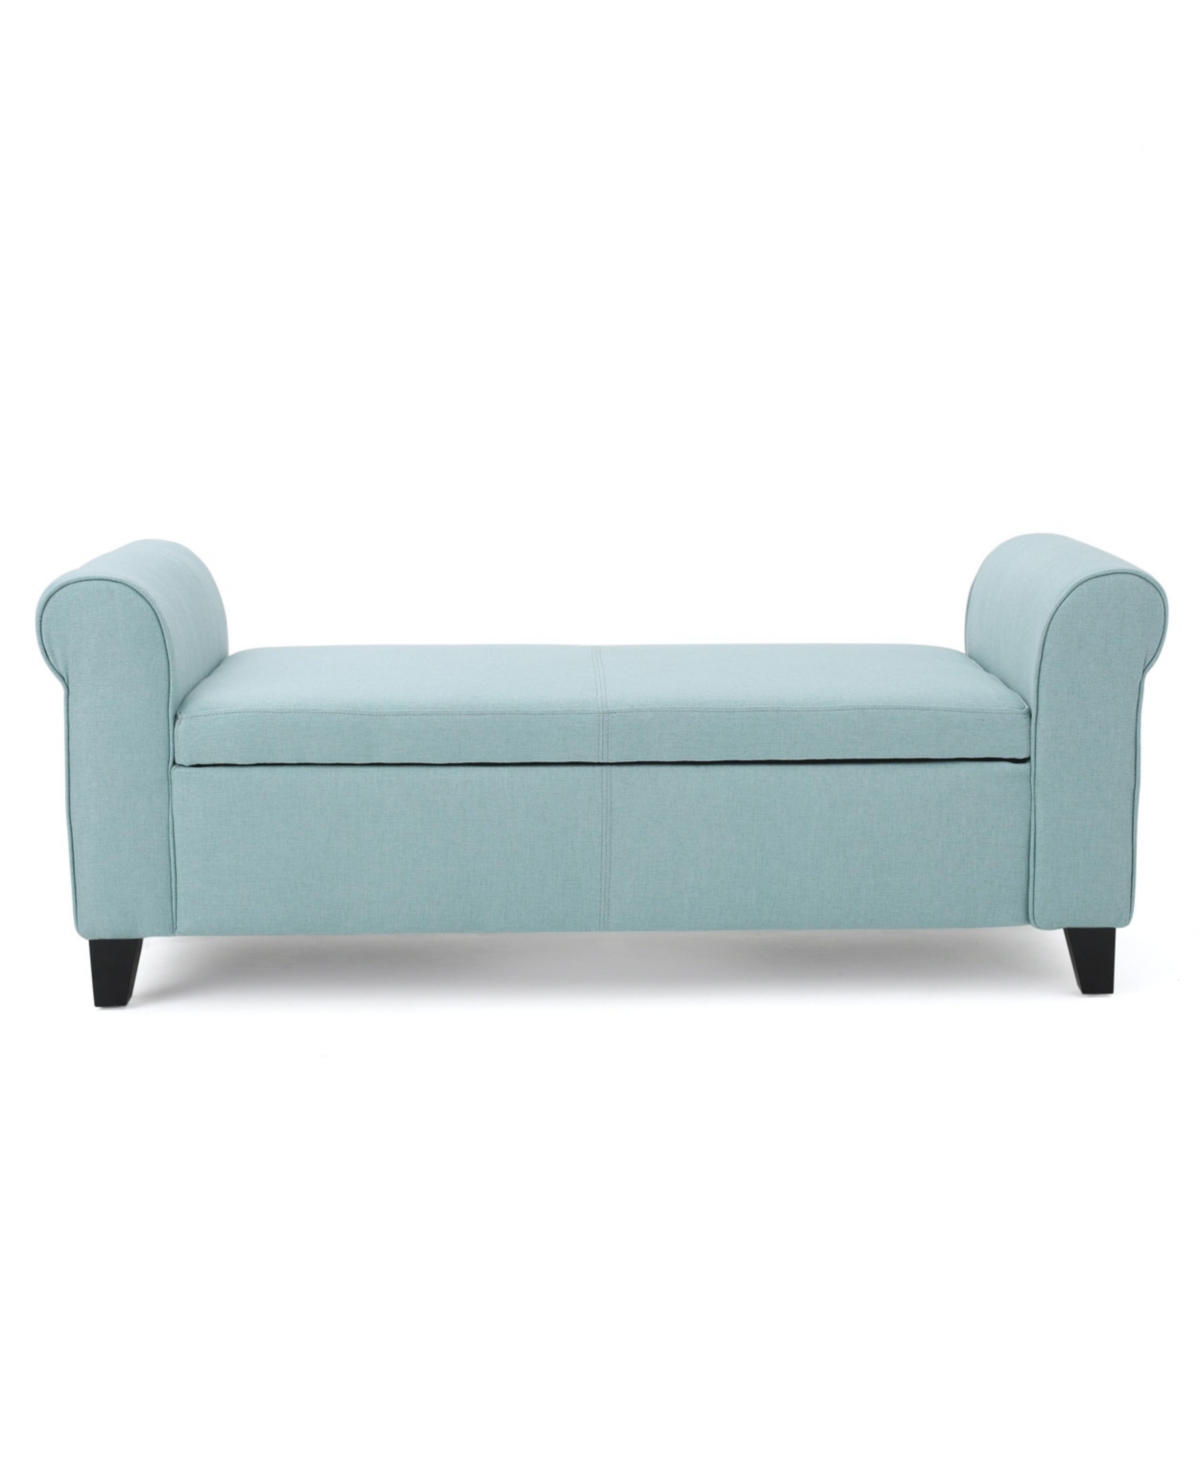 Noble House Hayes Contemporary Upholstered Storage Ottoman Bench With Rolled Arms In Light Blue